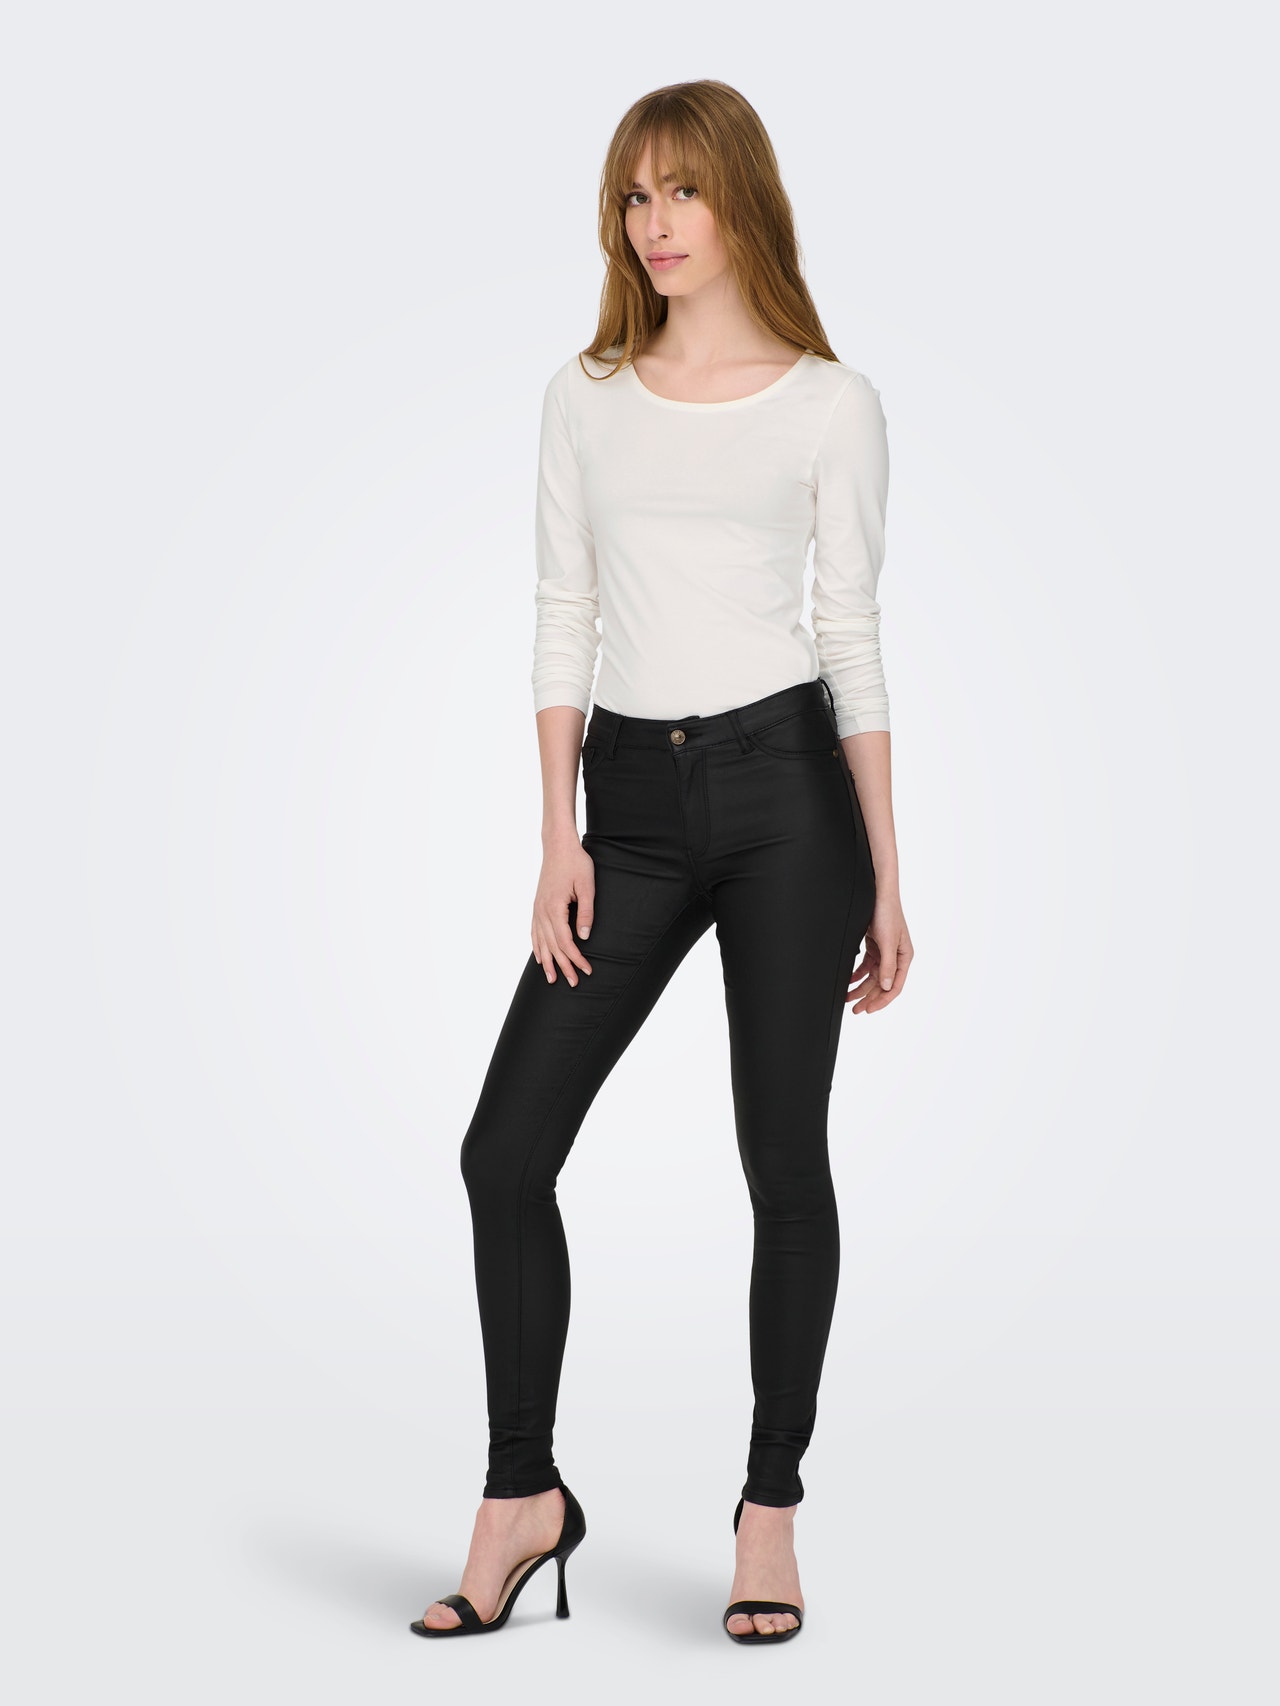 ONLY Tight fitted top -Cloud Dancer - 15300684